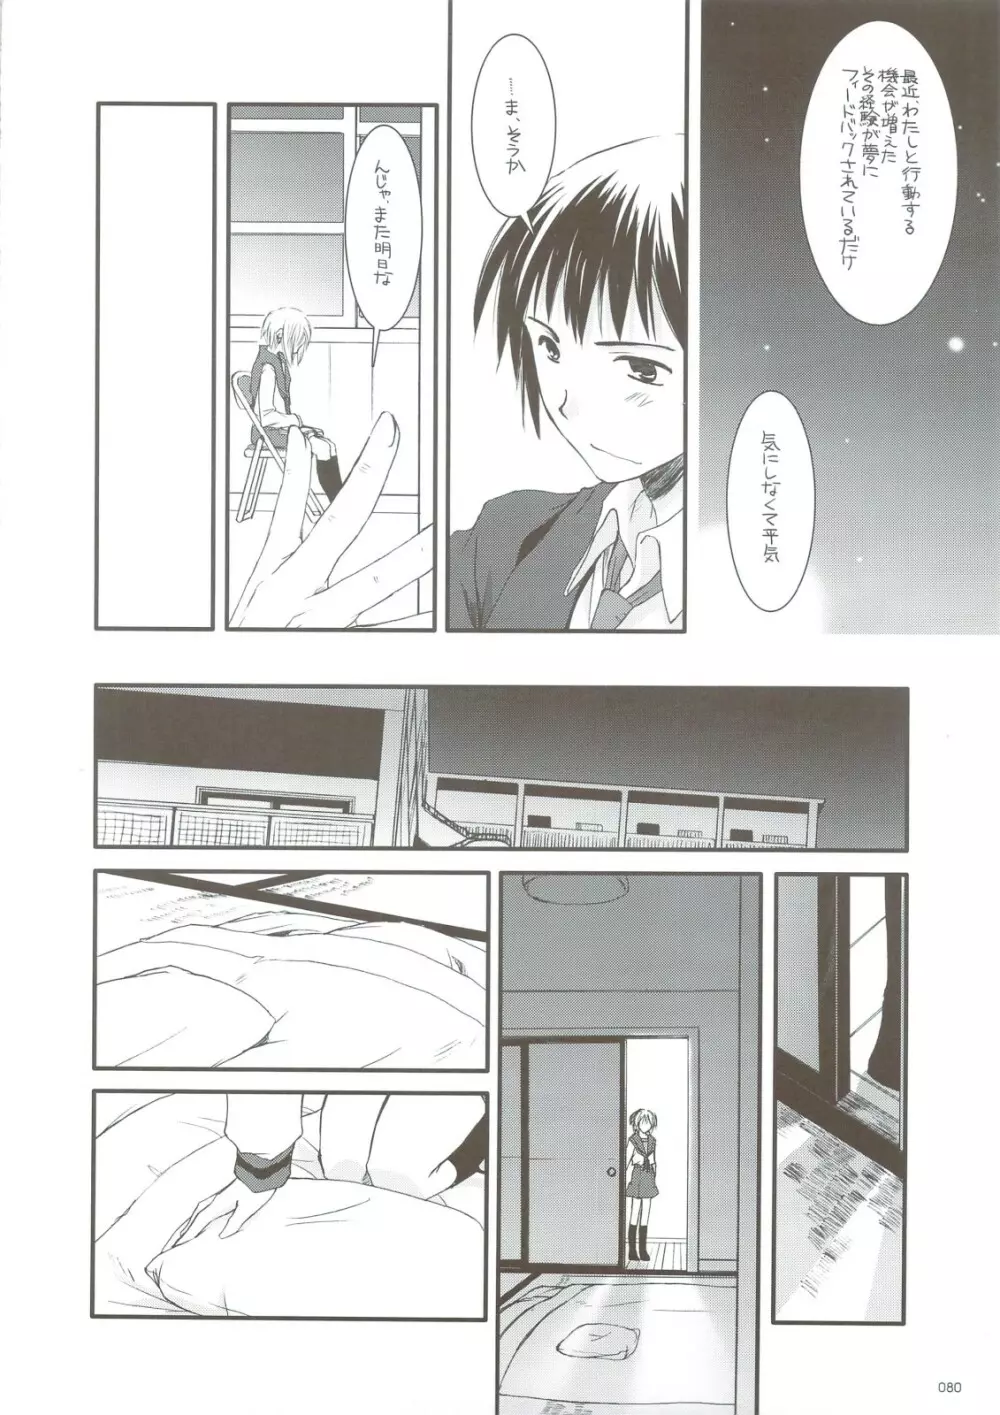 DL-SOS 総集編 - page79